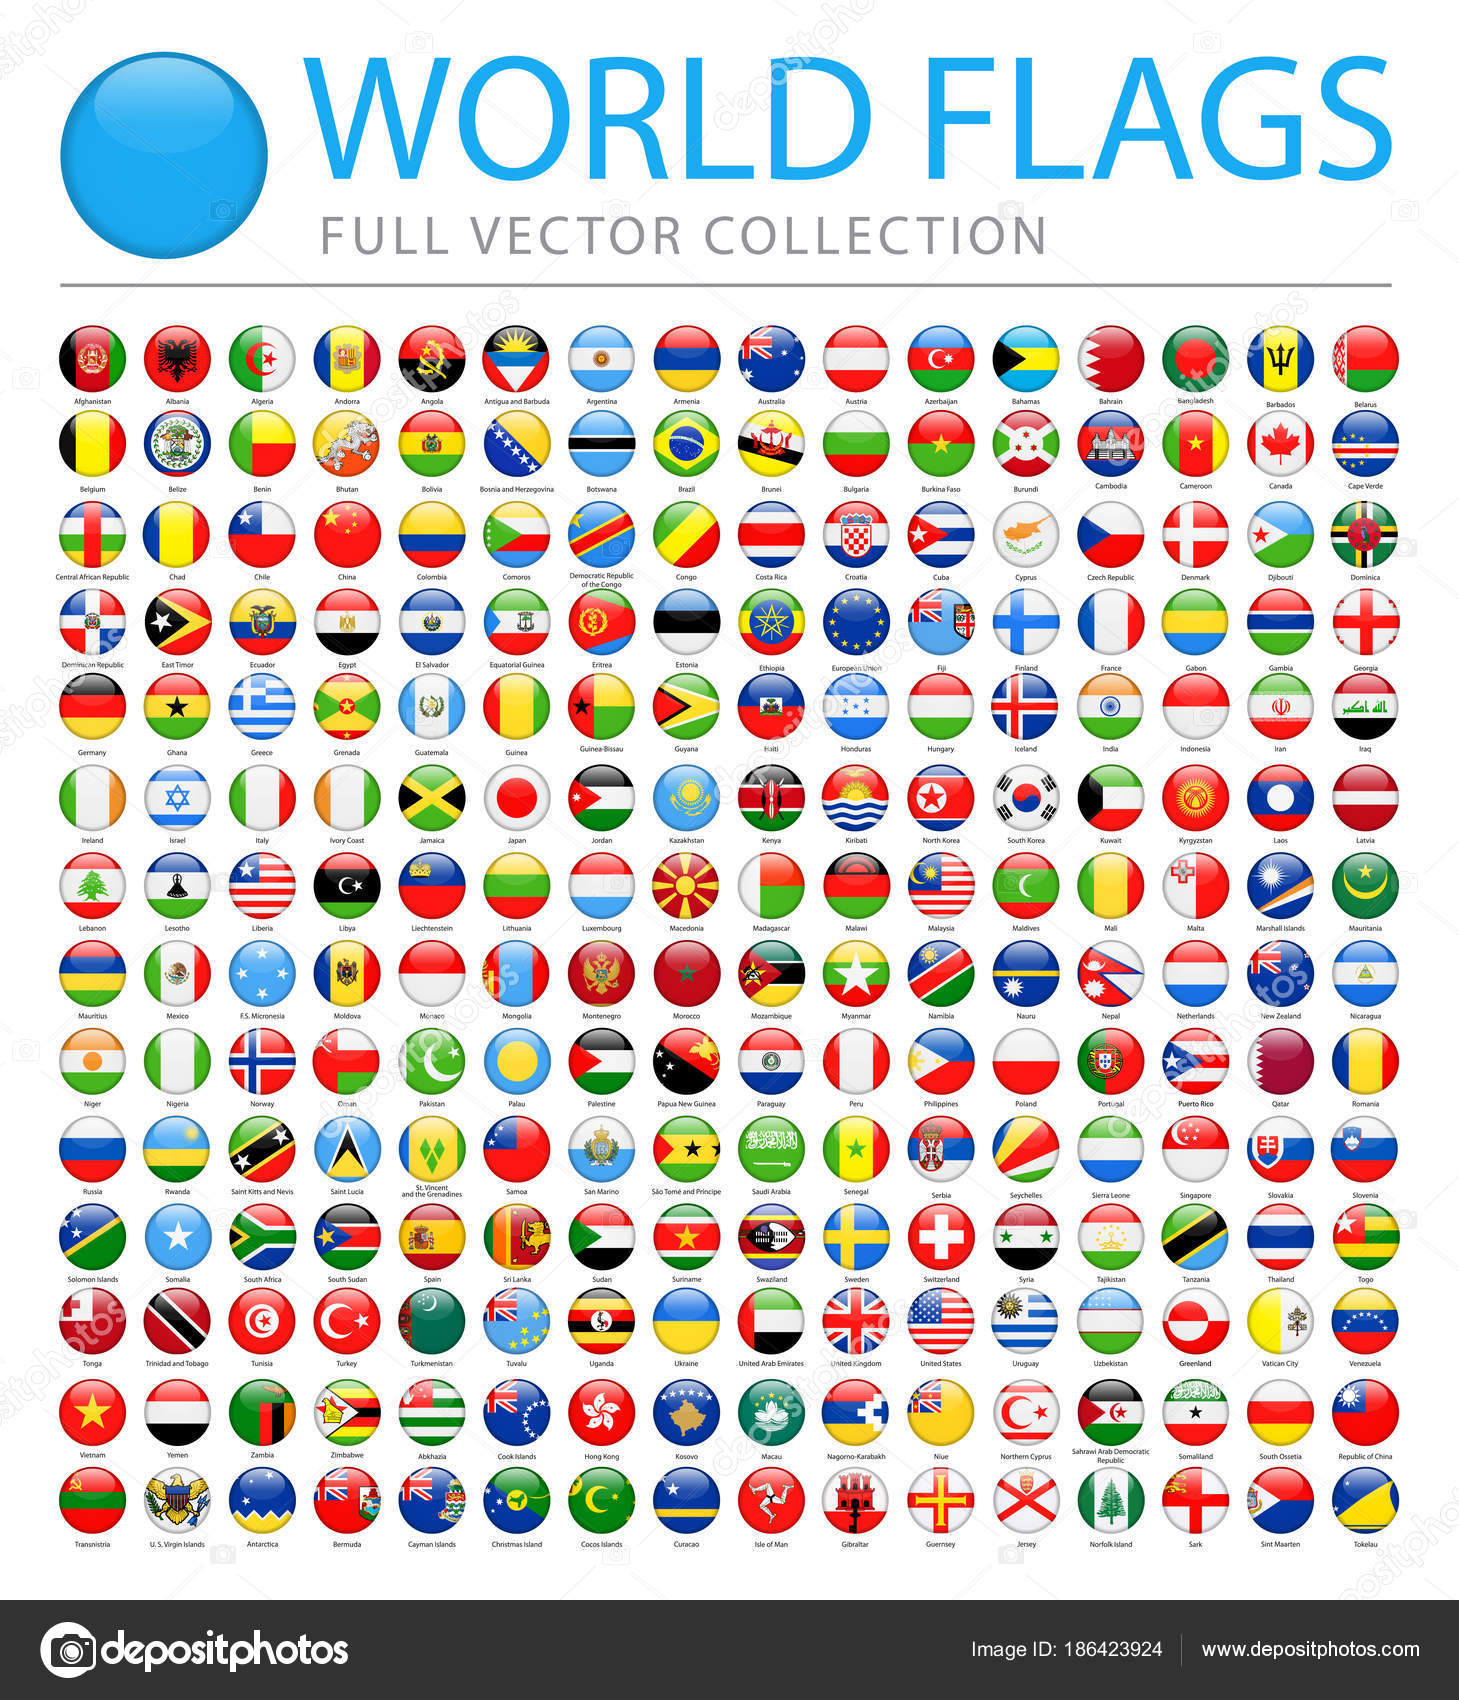 All World Flags New Additional List Of Countries And Territories